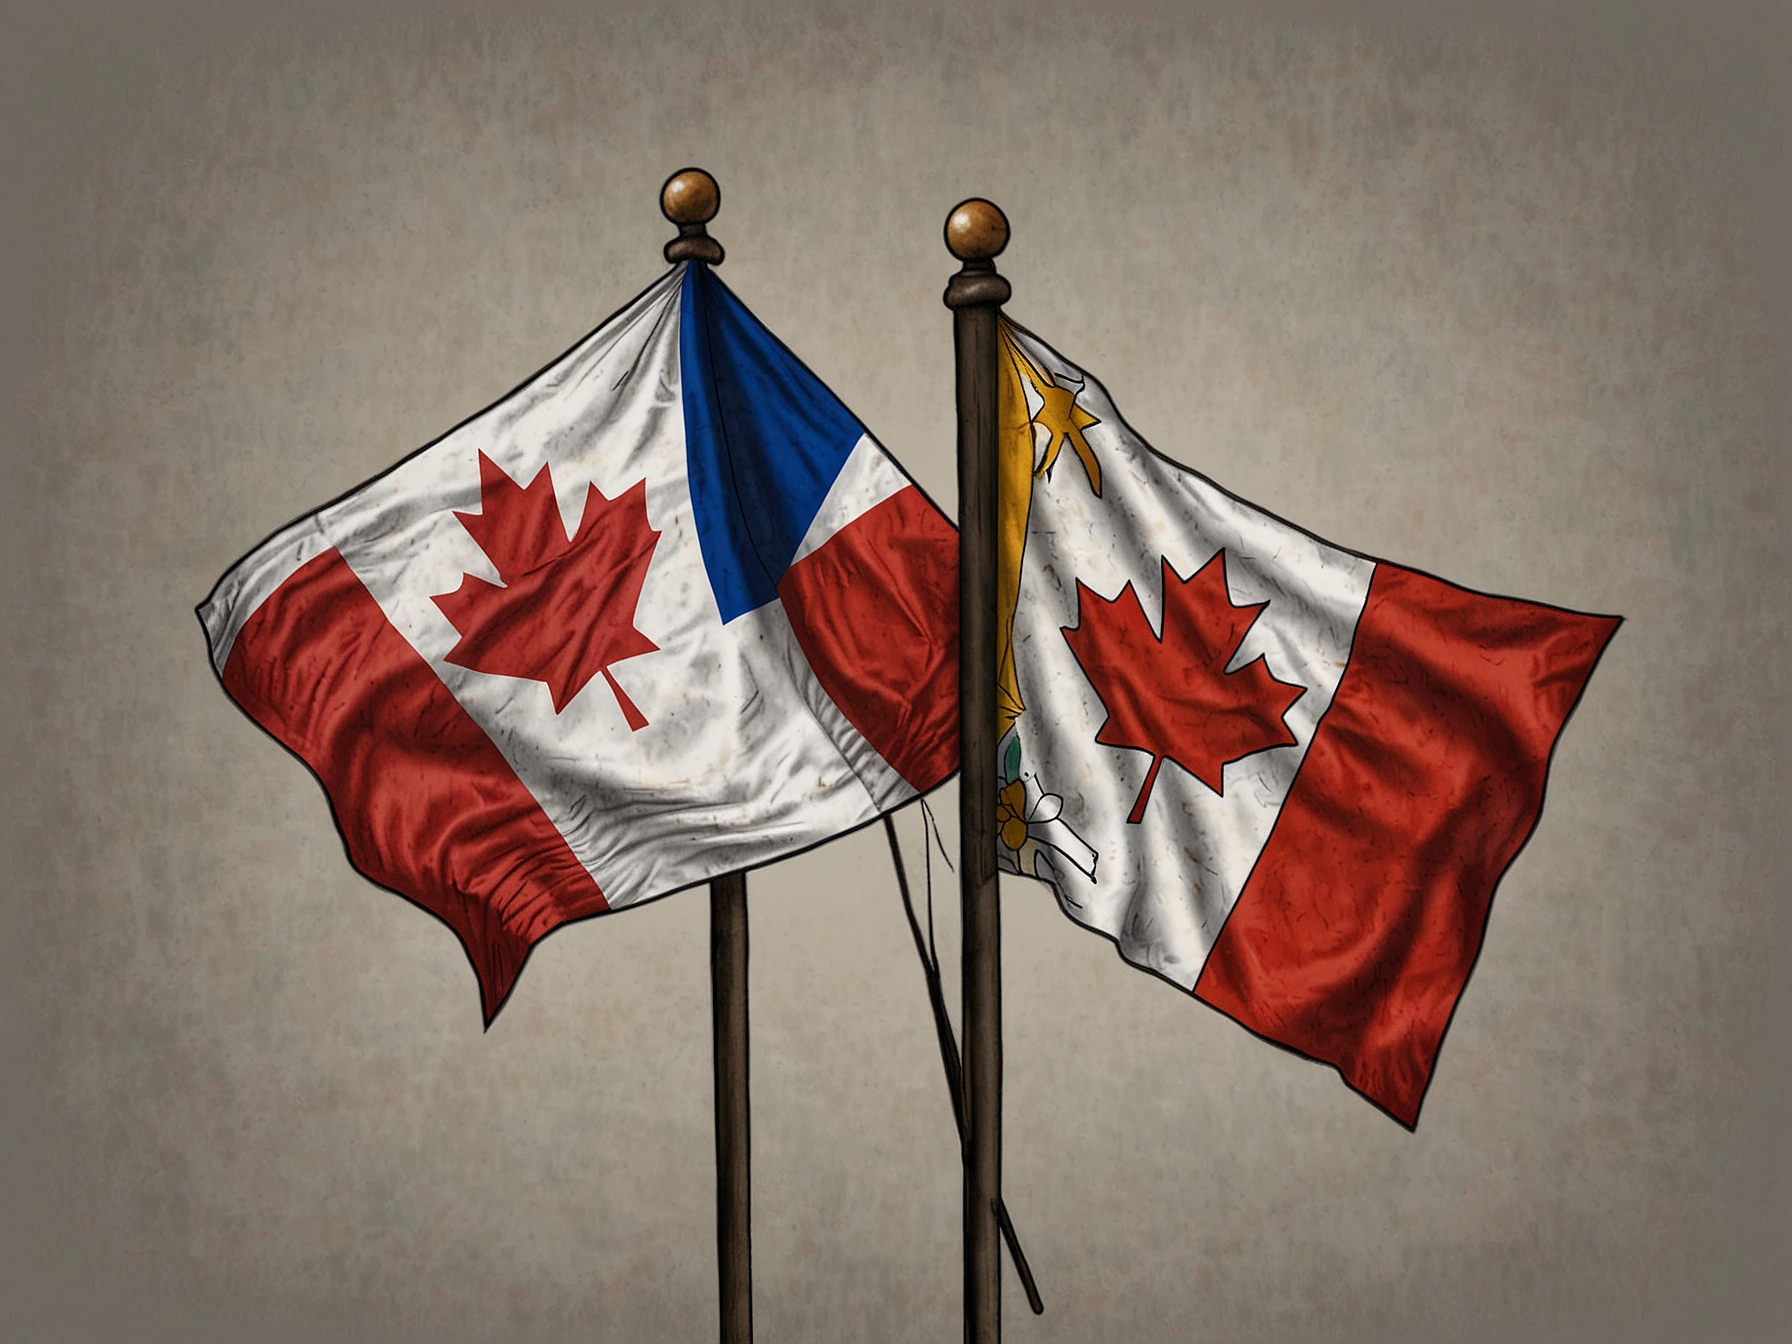 An image of Canadian and Filipino flags side by side, symbolizing the 75-year diplomatic relationship and mutual collaboration between Canada and the Philippines.